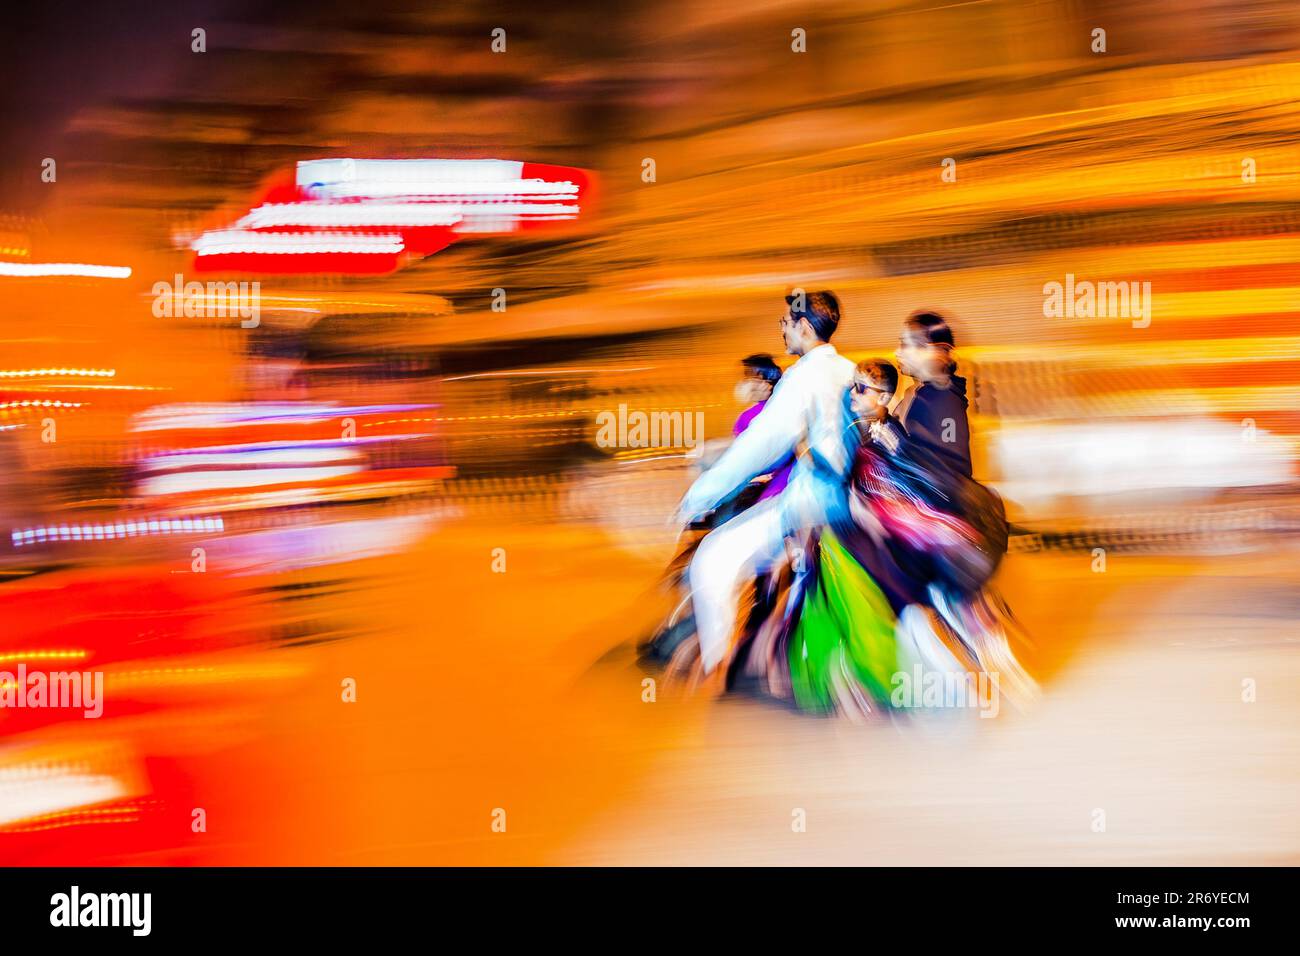 New Delhi, India - November 10, 2011:  motorbike driving in blurred motion by night in Chandni Chowk. The Chandni Chowk is one of the oldest and busie Stock Photo